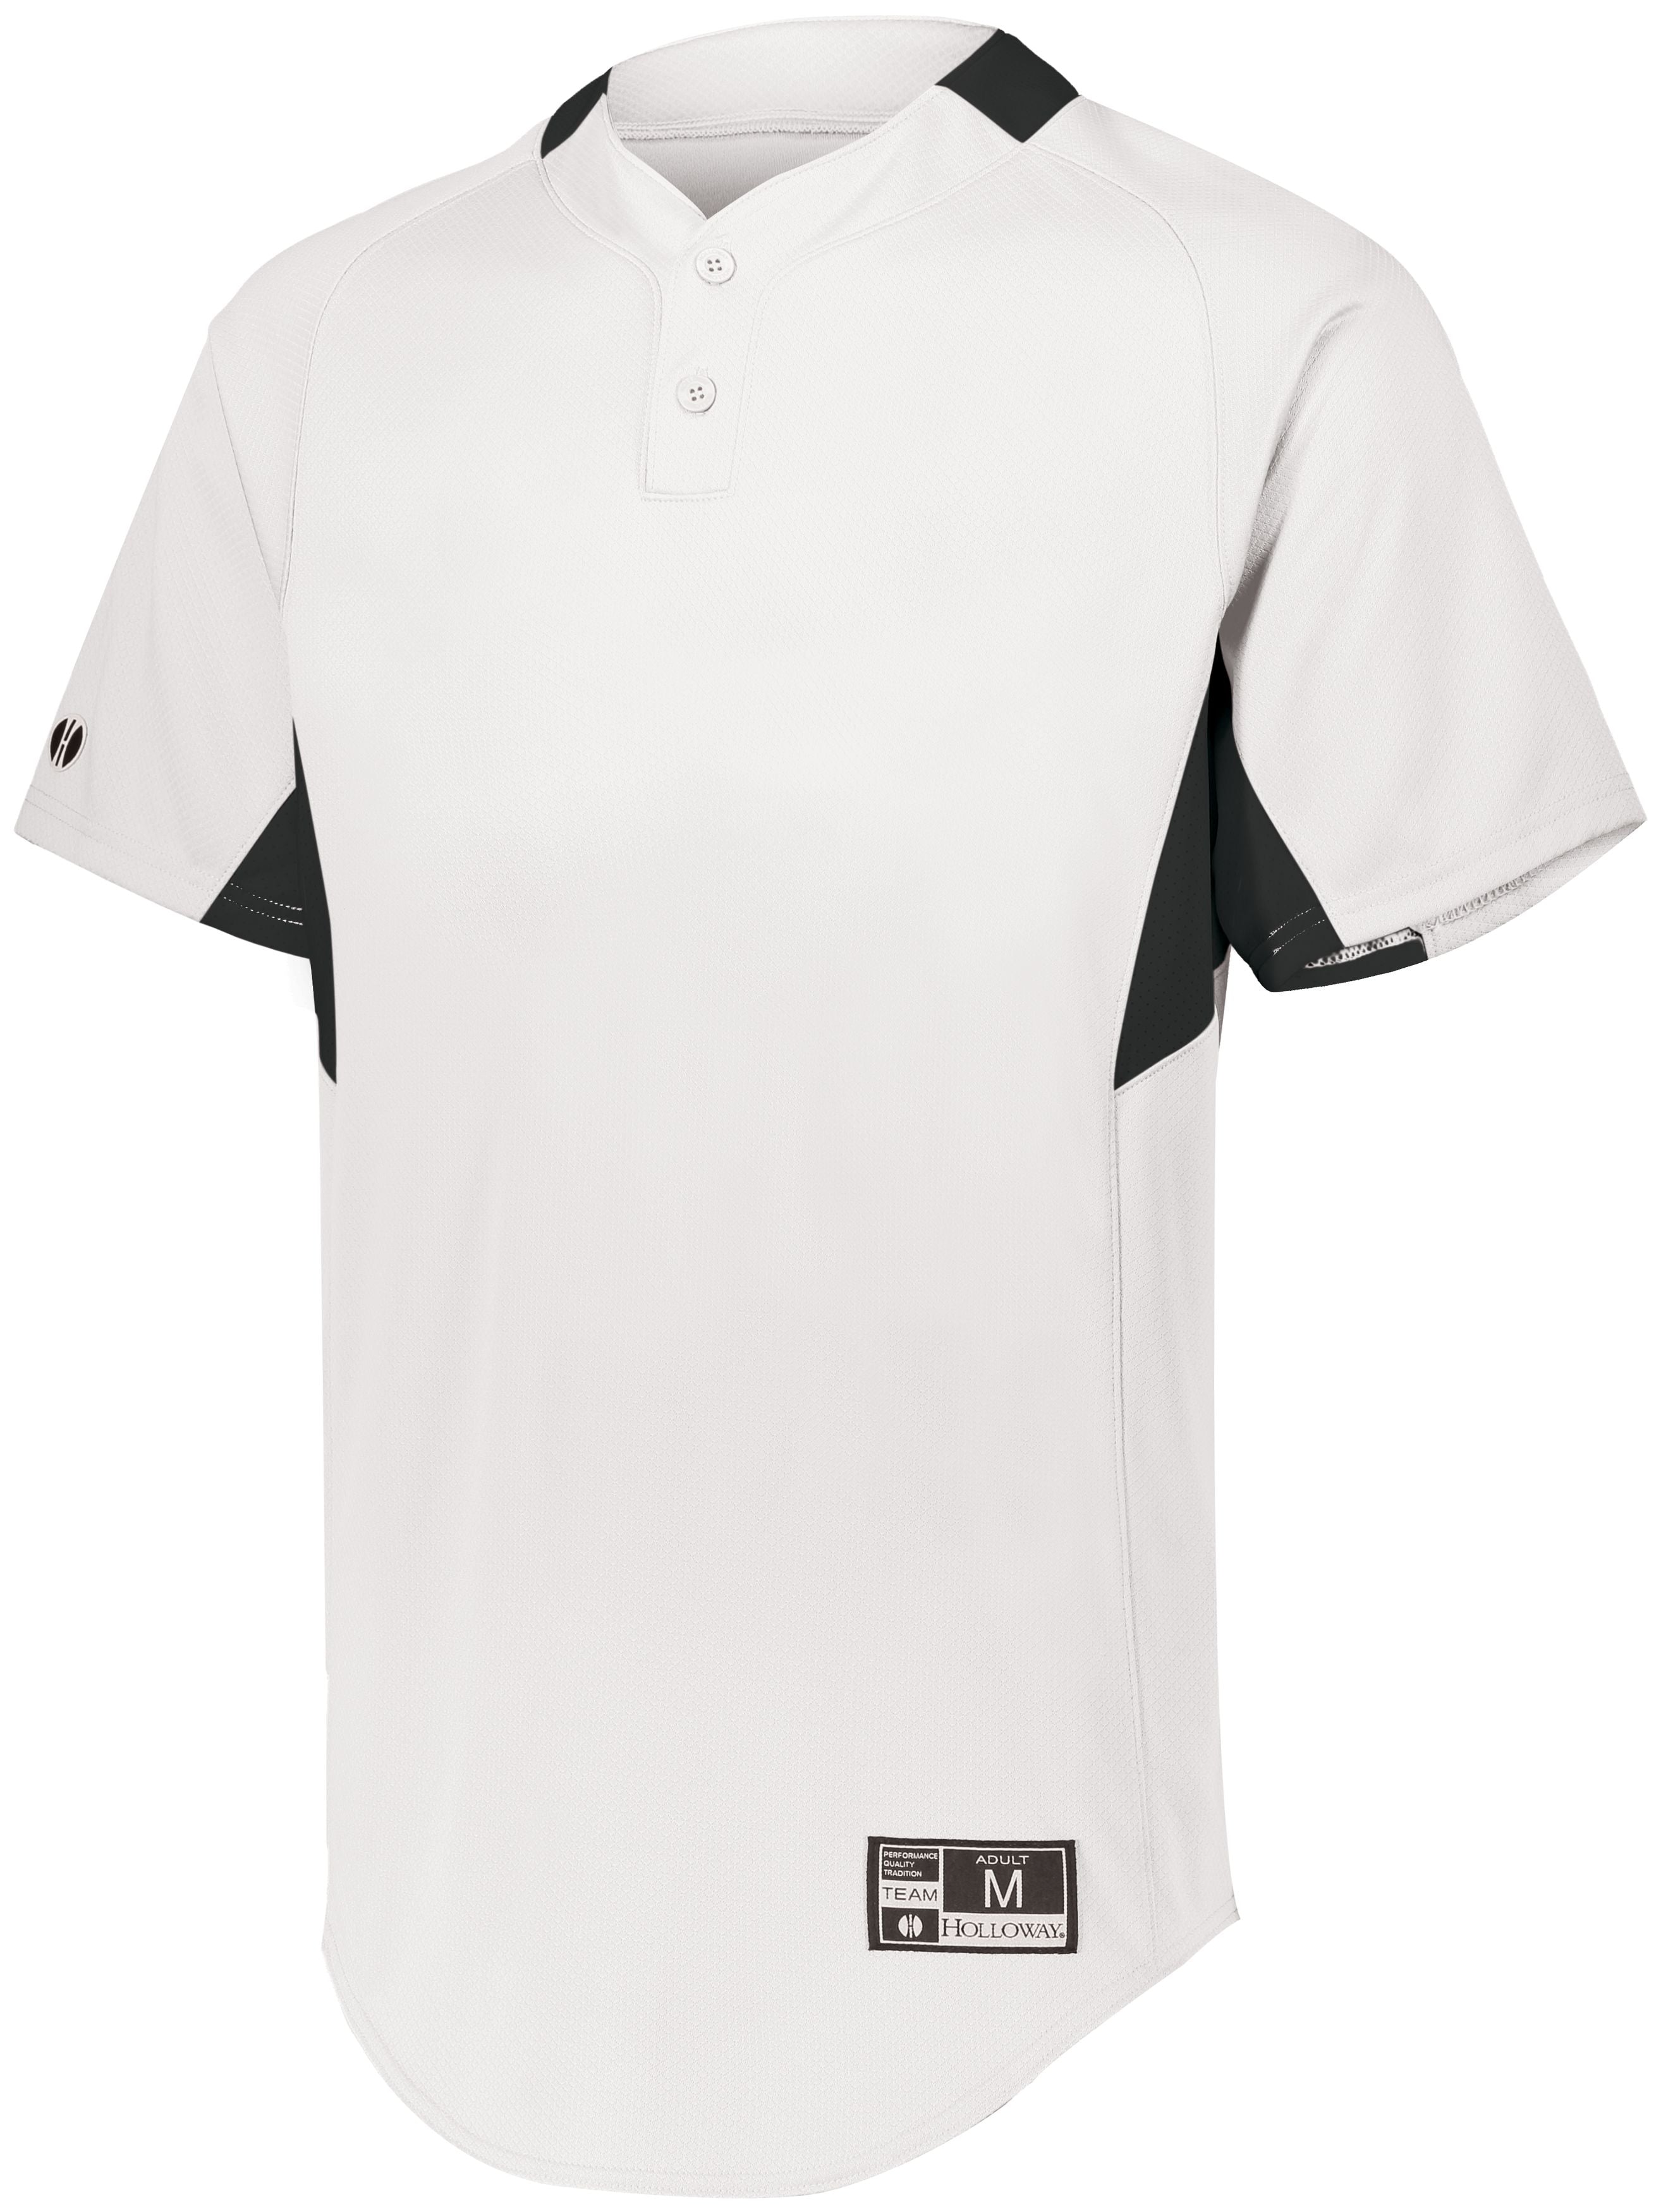 Holloway Youth  Game7 Two-Button Baseball Jersey in White/Black  -Part of the Youth, Youth-Jersey, Baseball, Holloway, Shirts, All-Sports, All-Sports-1 product lines at KanaleyCreations.com